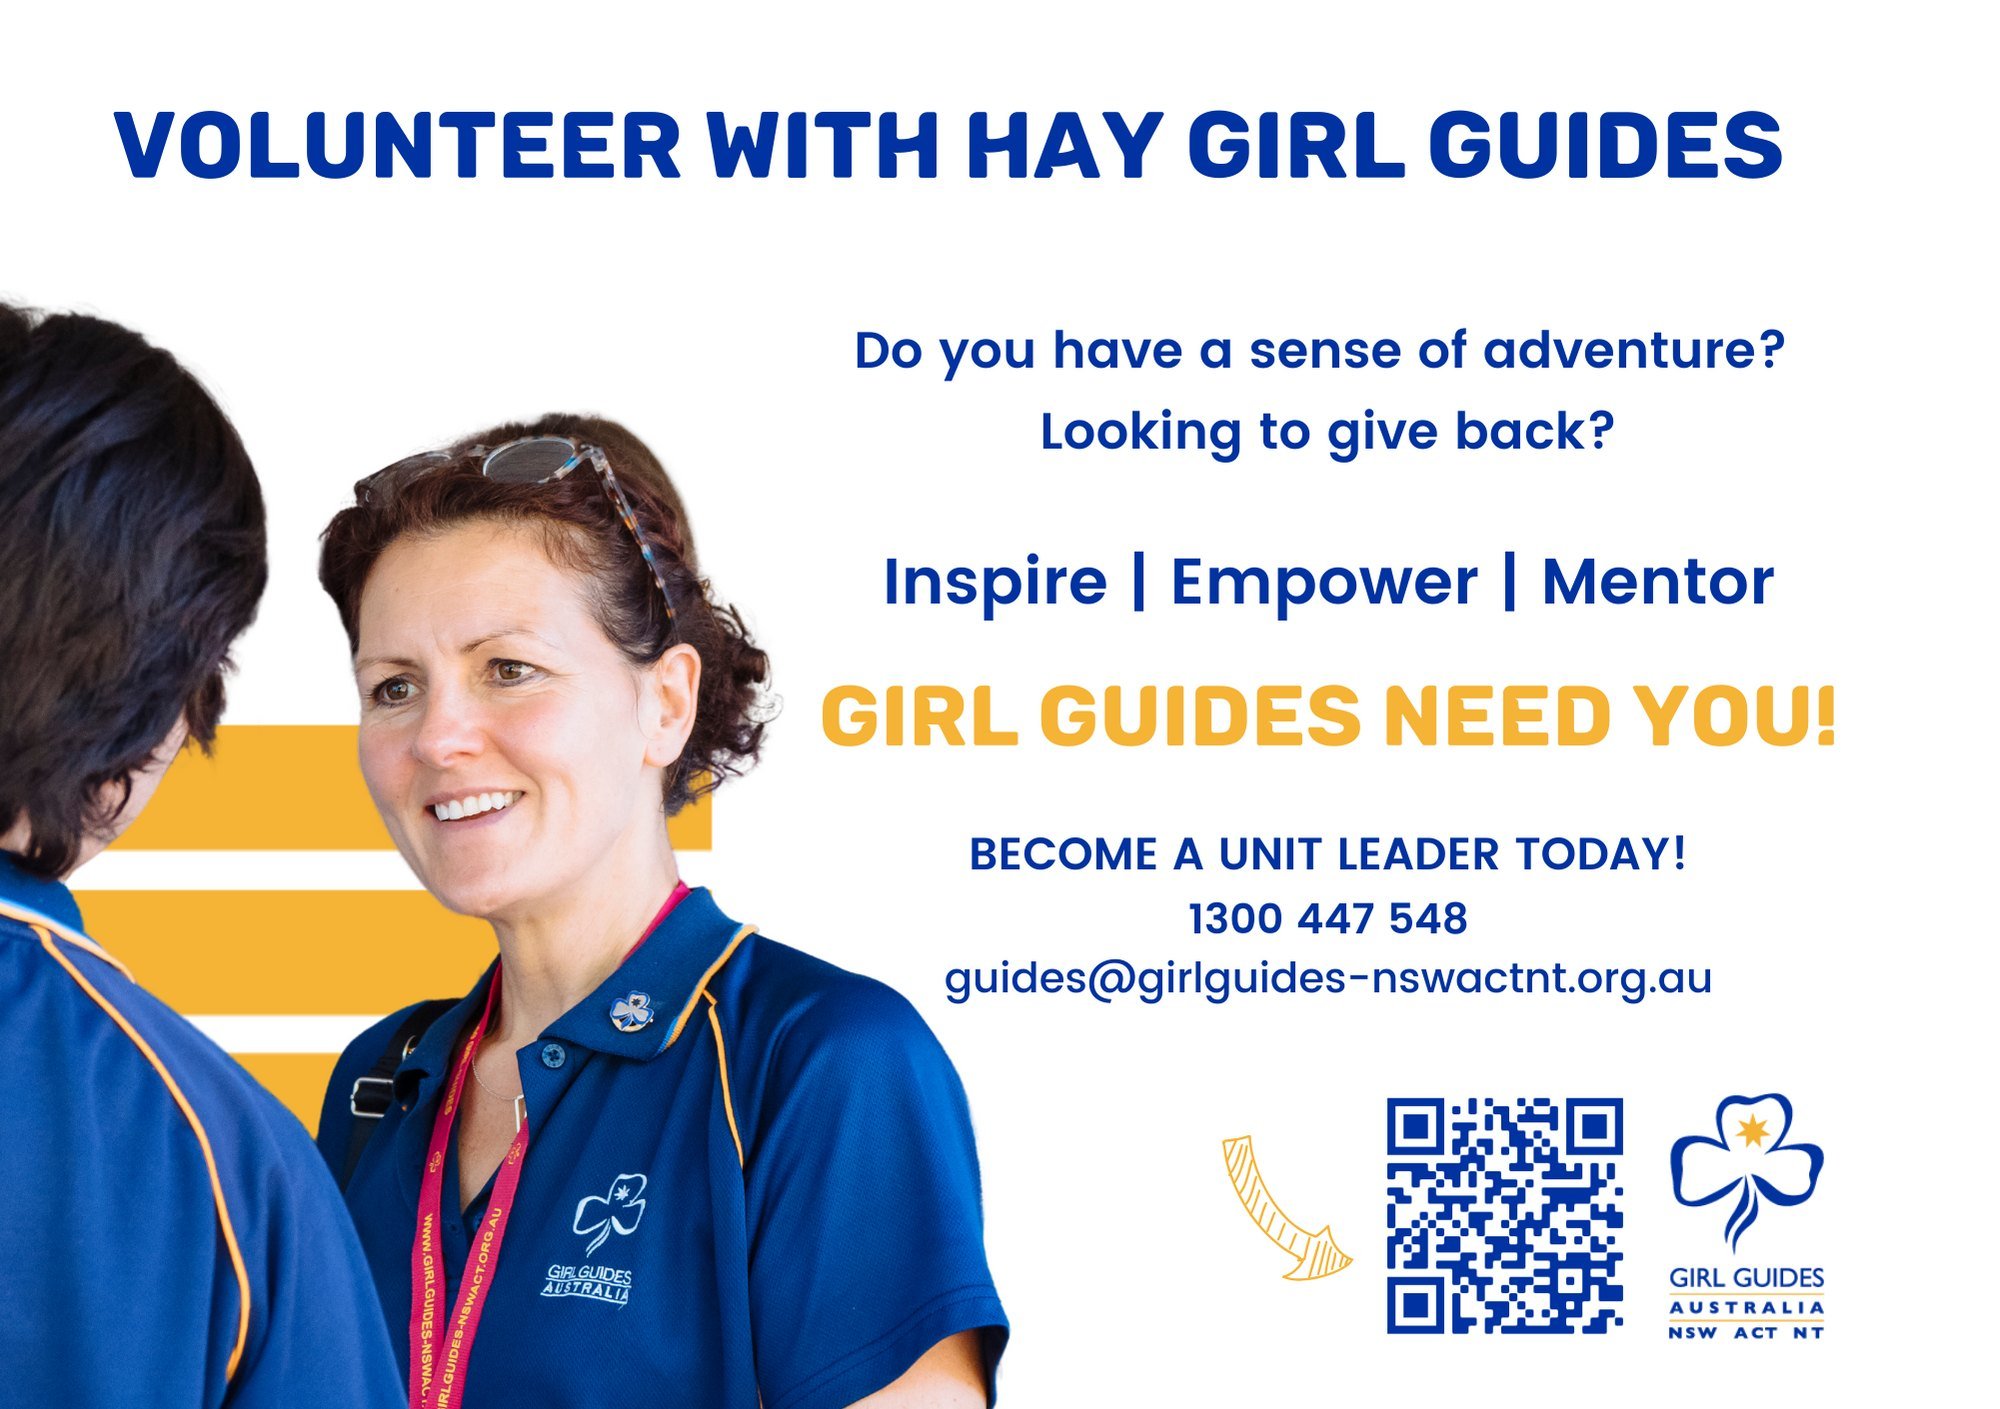 SPONSORED POST - Hay Girl Guides is recruiting volunteers. If you are looking for an opportunity to give back, contact the Guides today!